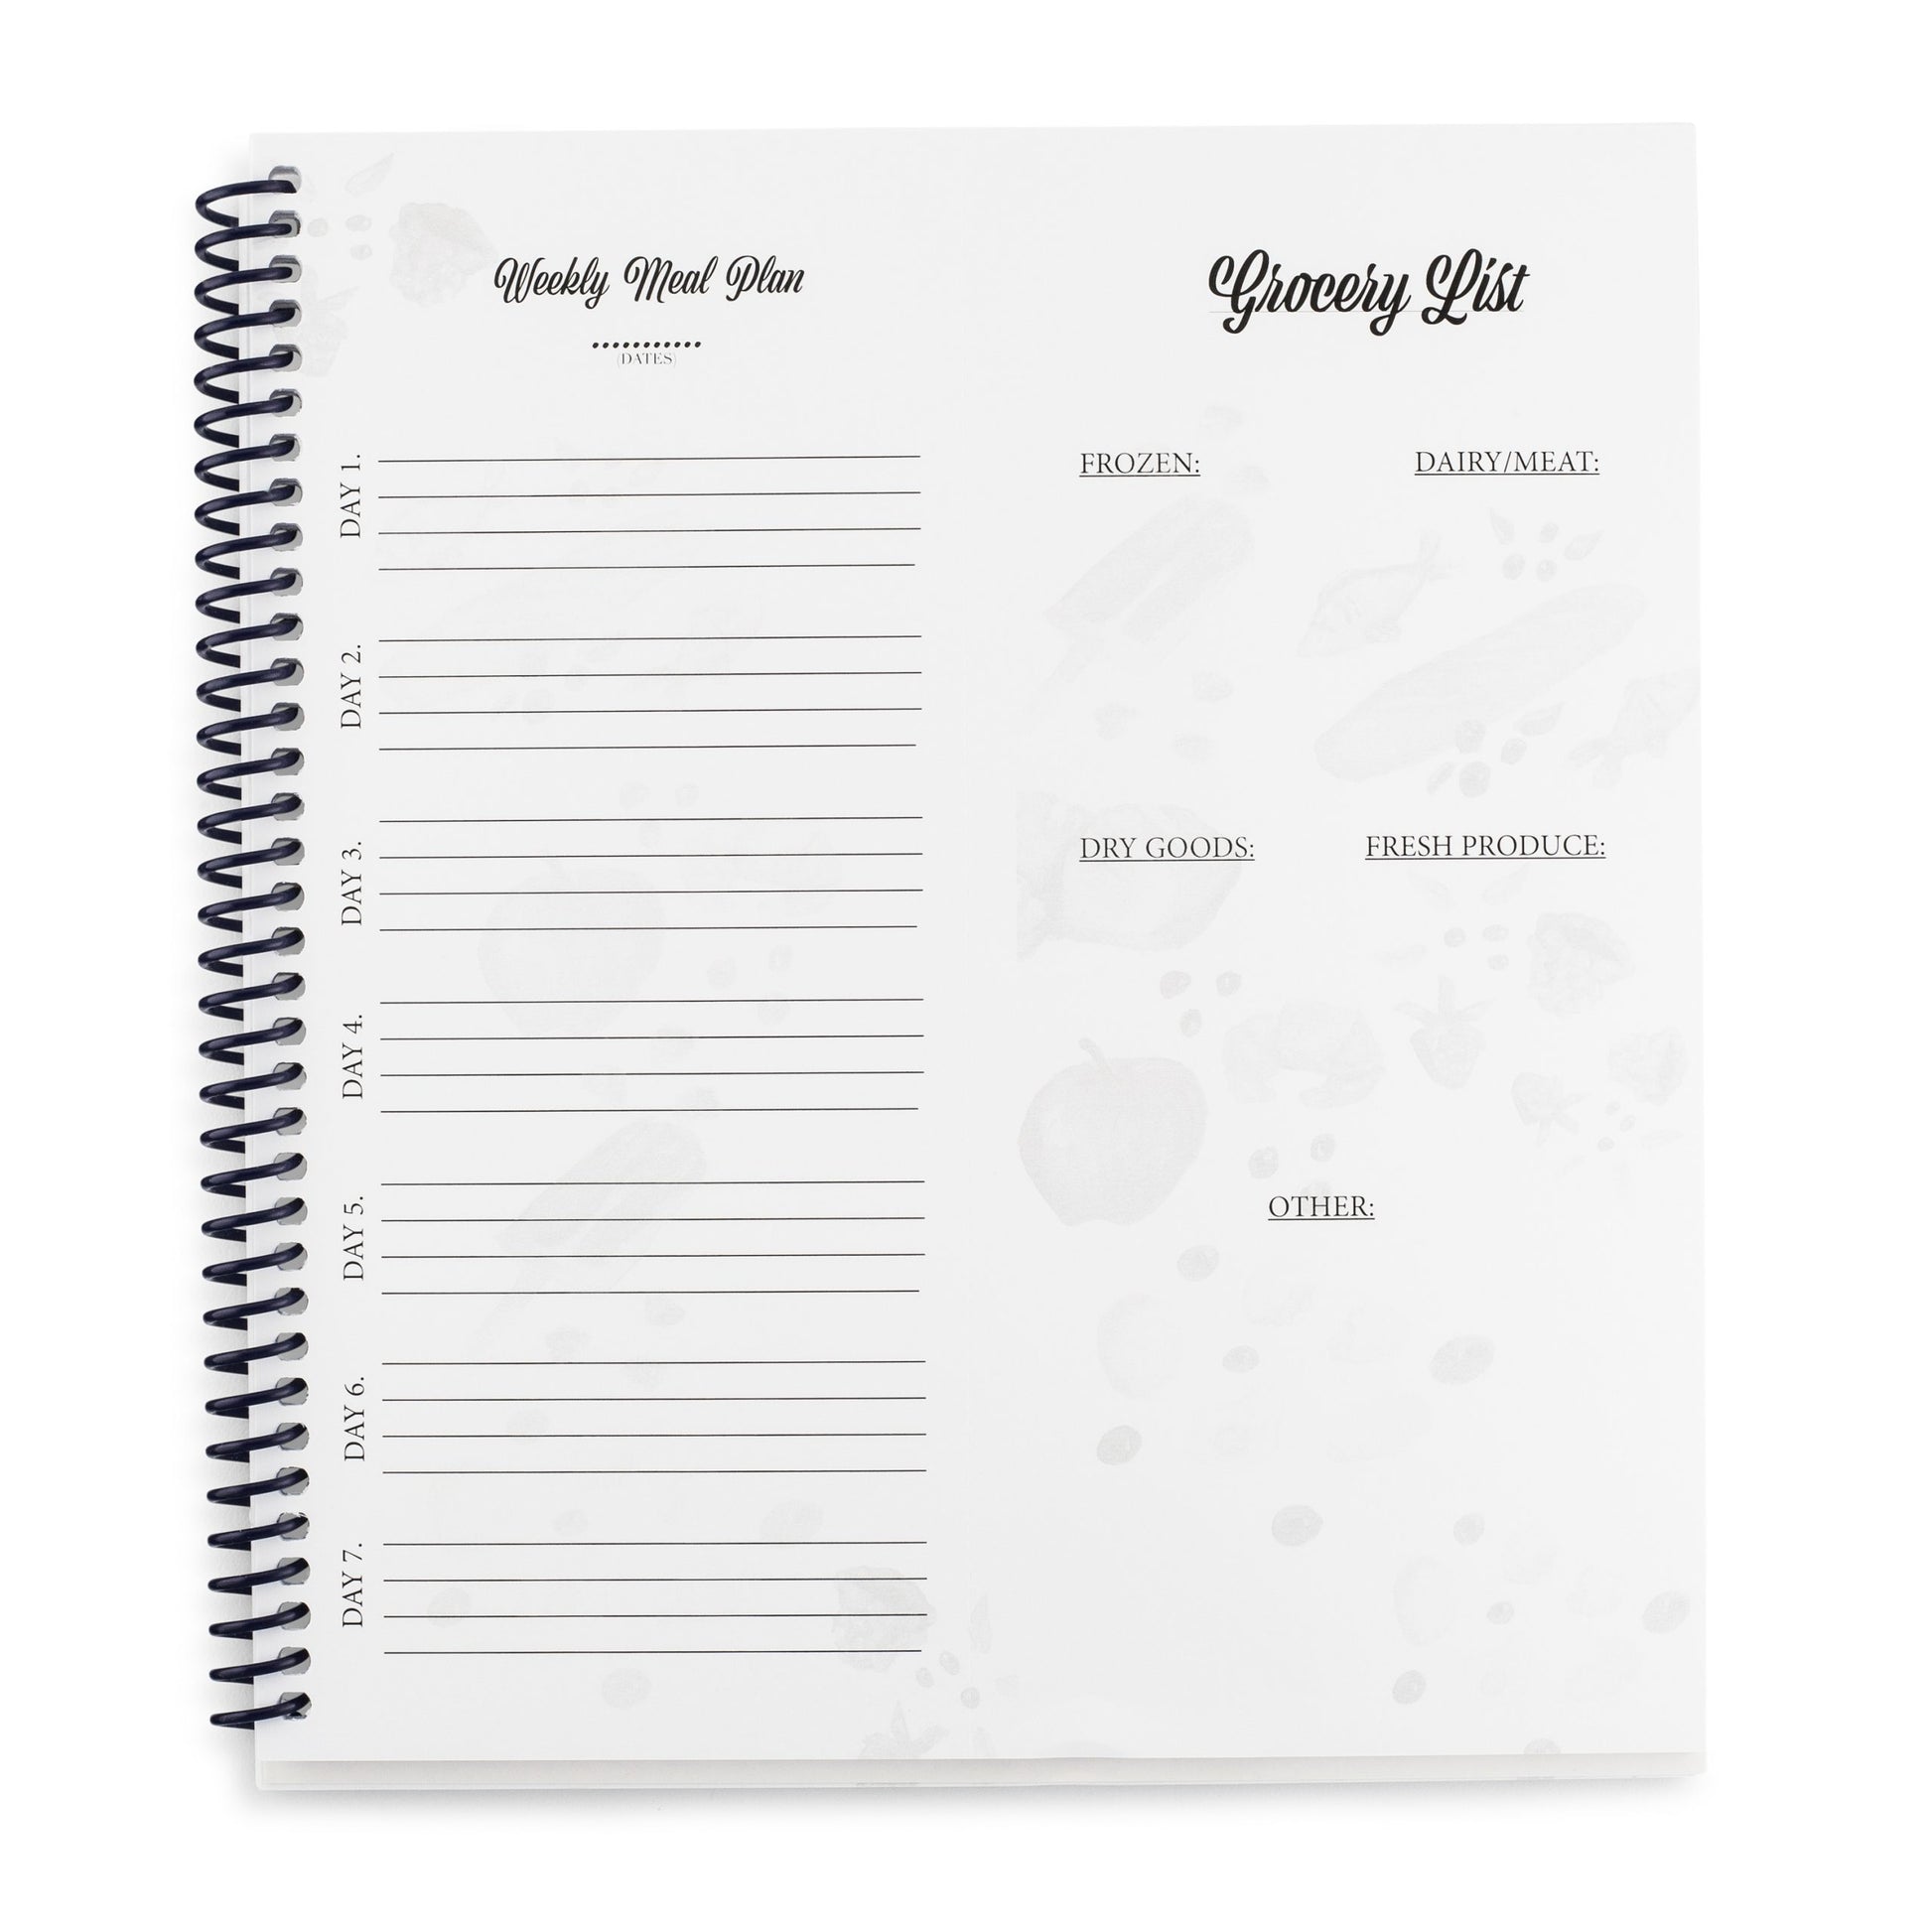 Best Selling Simple Purposeful Living 52 week meal planner meal planning spiral bound notebook with tear off grocery list. Meal planning space for breakfast, lunch, dinner, dessert and/or snacks.